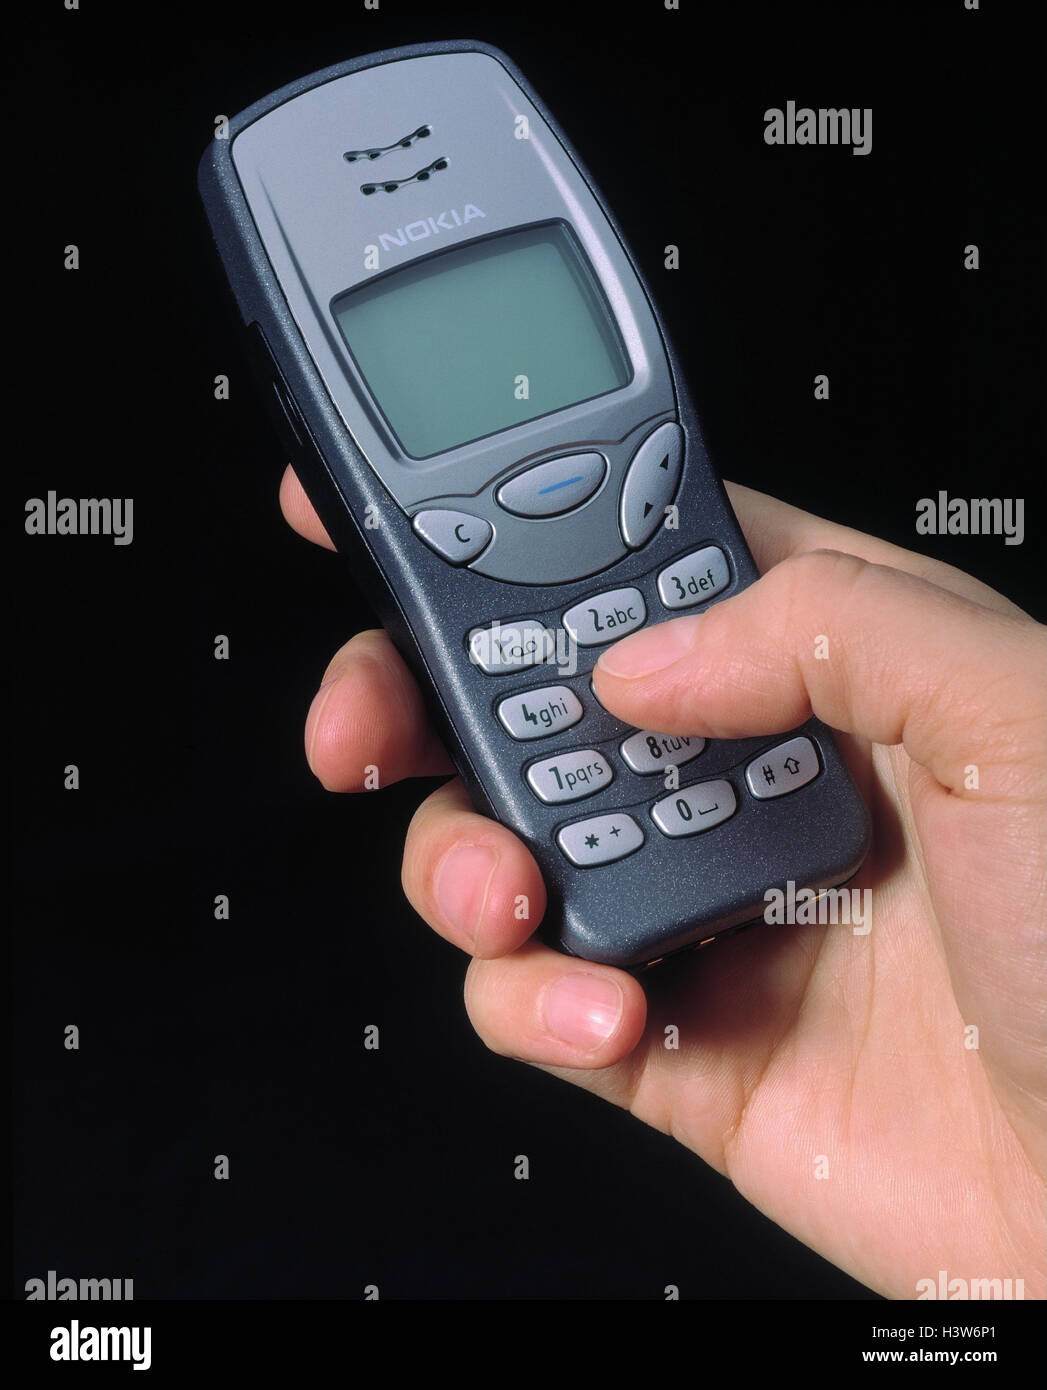 Hand, mobile phone, producer, Nokia, pollex, select, radio telephone,  mobile phone, communication, phone, SMS, transmit, receive, short message,  message, display Stock Photo - Alamy